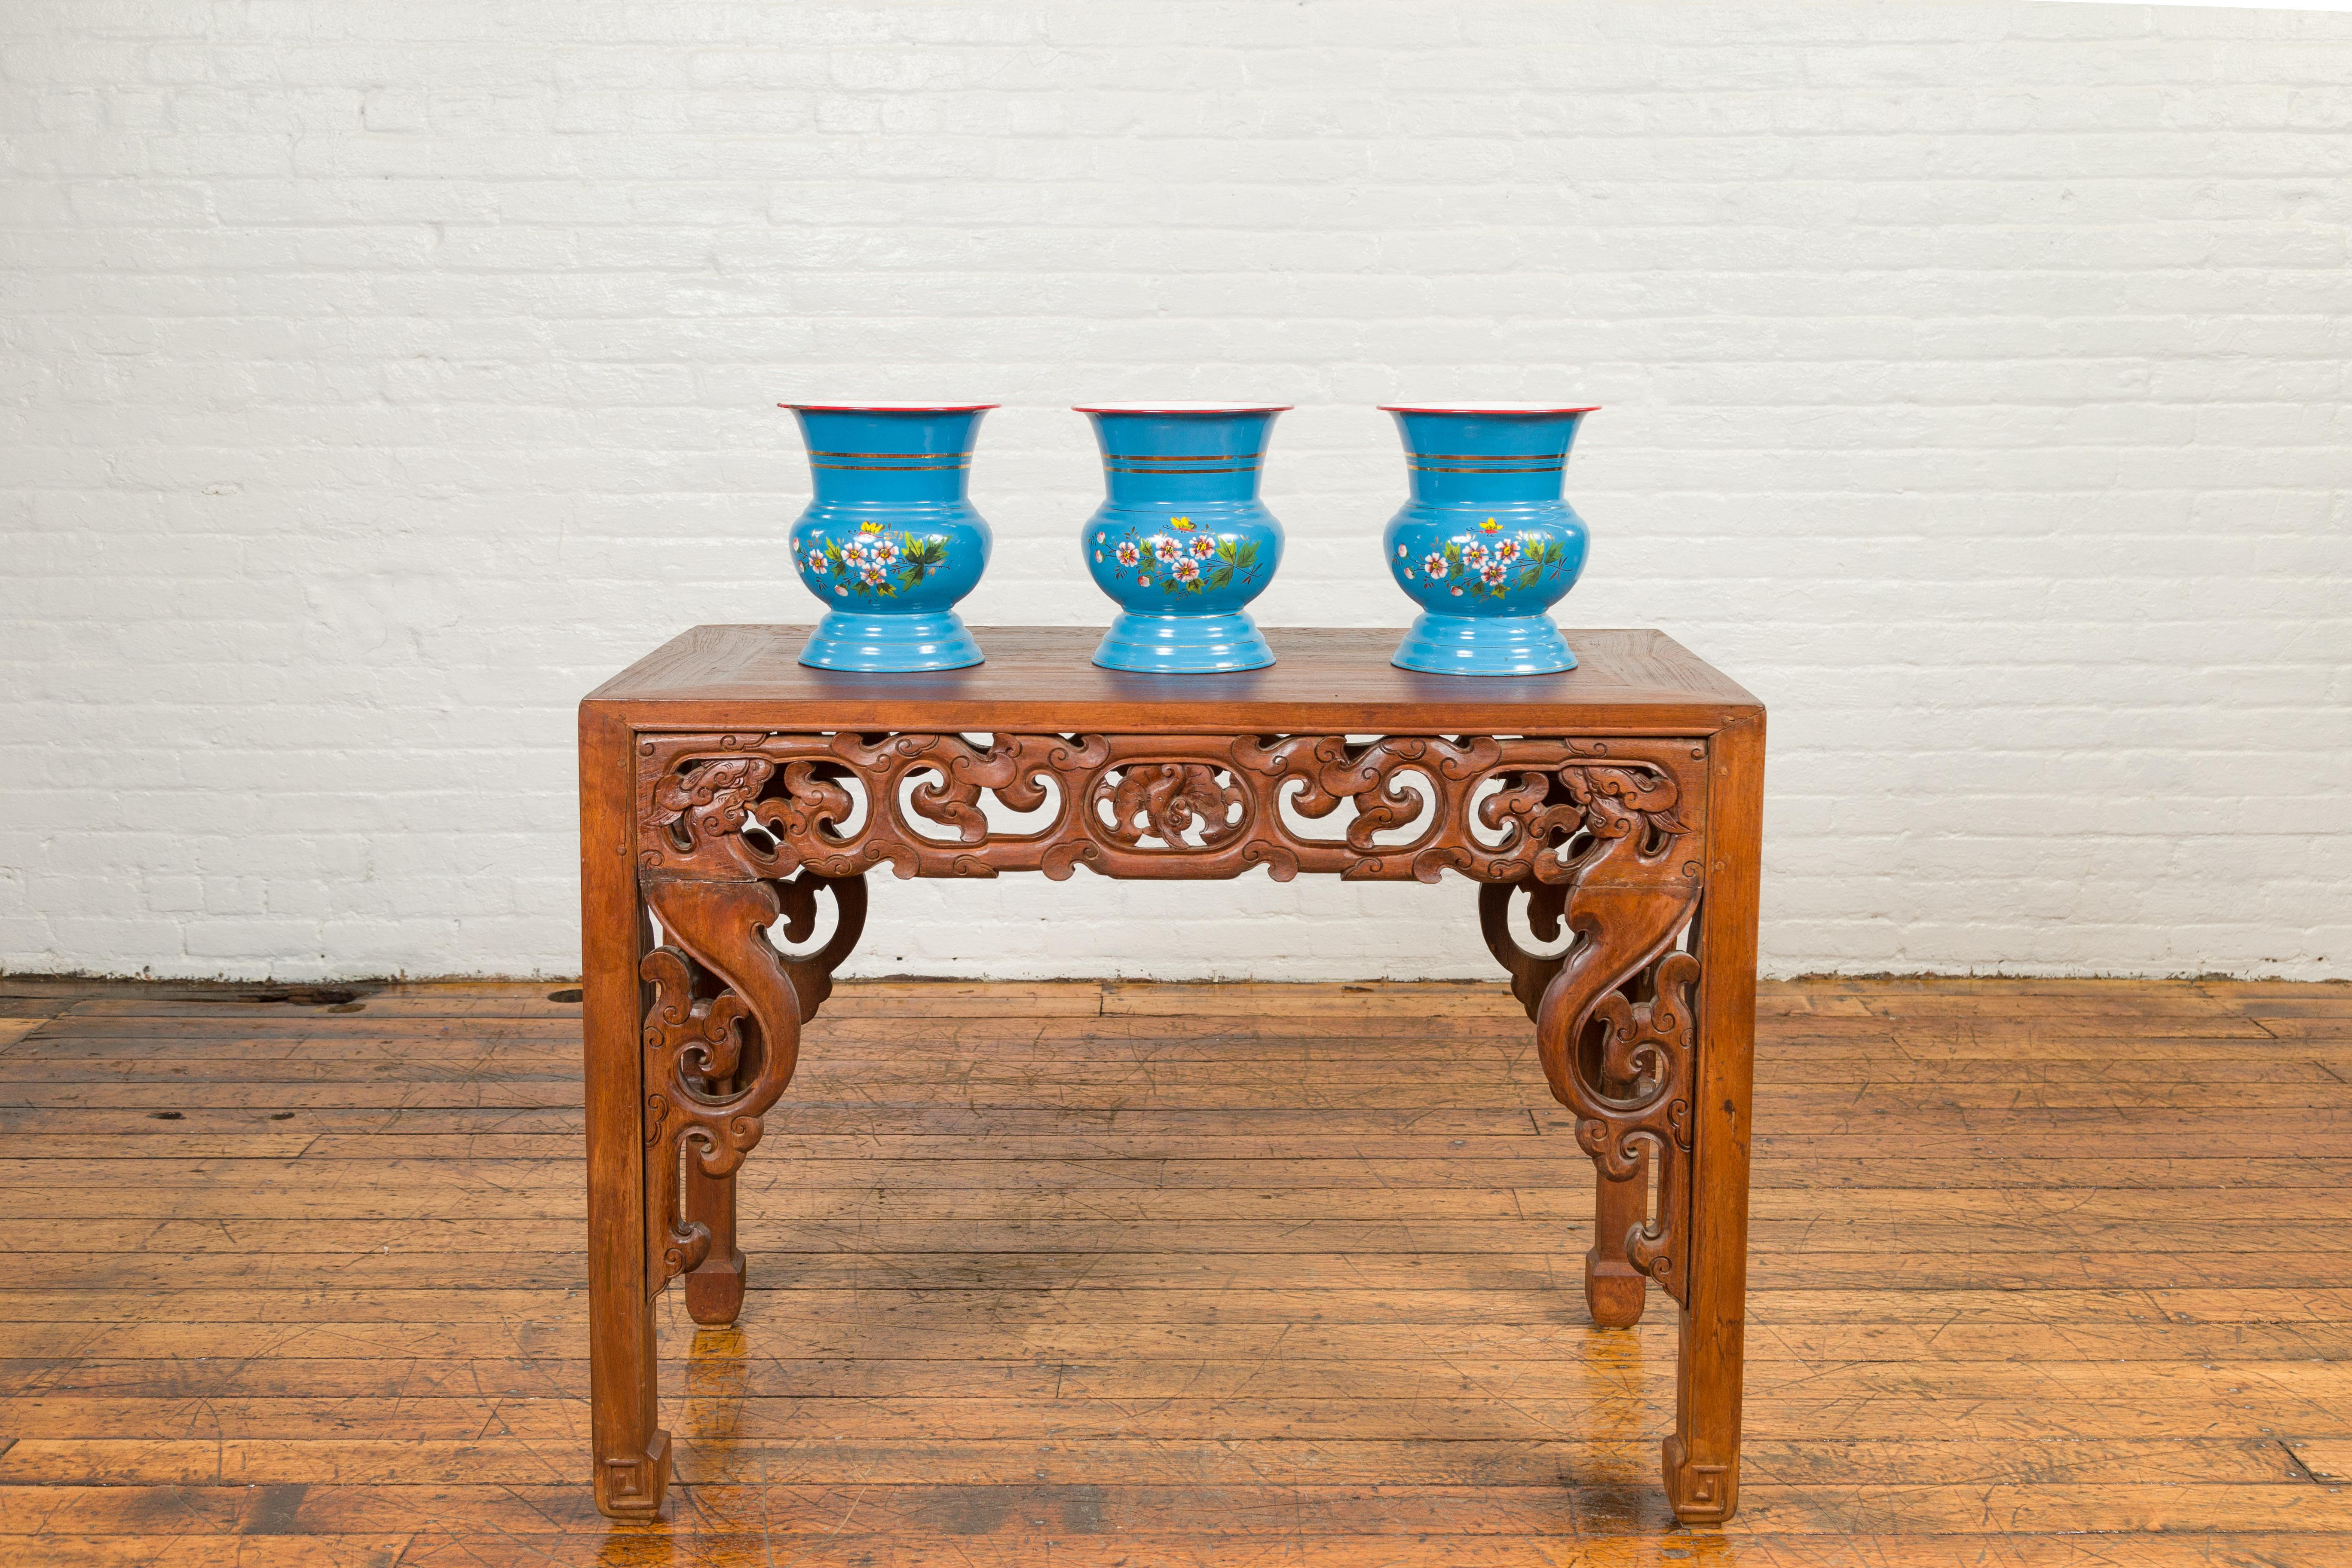 Three blue metal vases from the 20th century, with painted floral decor and read trim, priced and sold each. Crafted with metal from Czechoslovakia, each of these vases (priced $550 each) features a flaring neck topped with a red trim. The body,